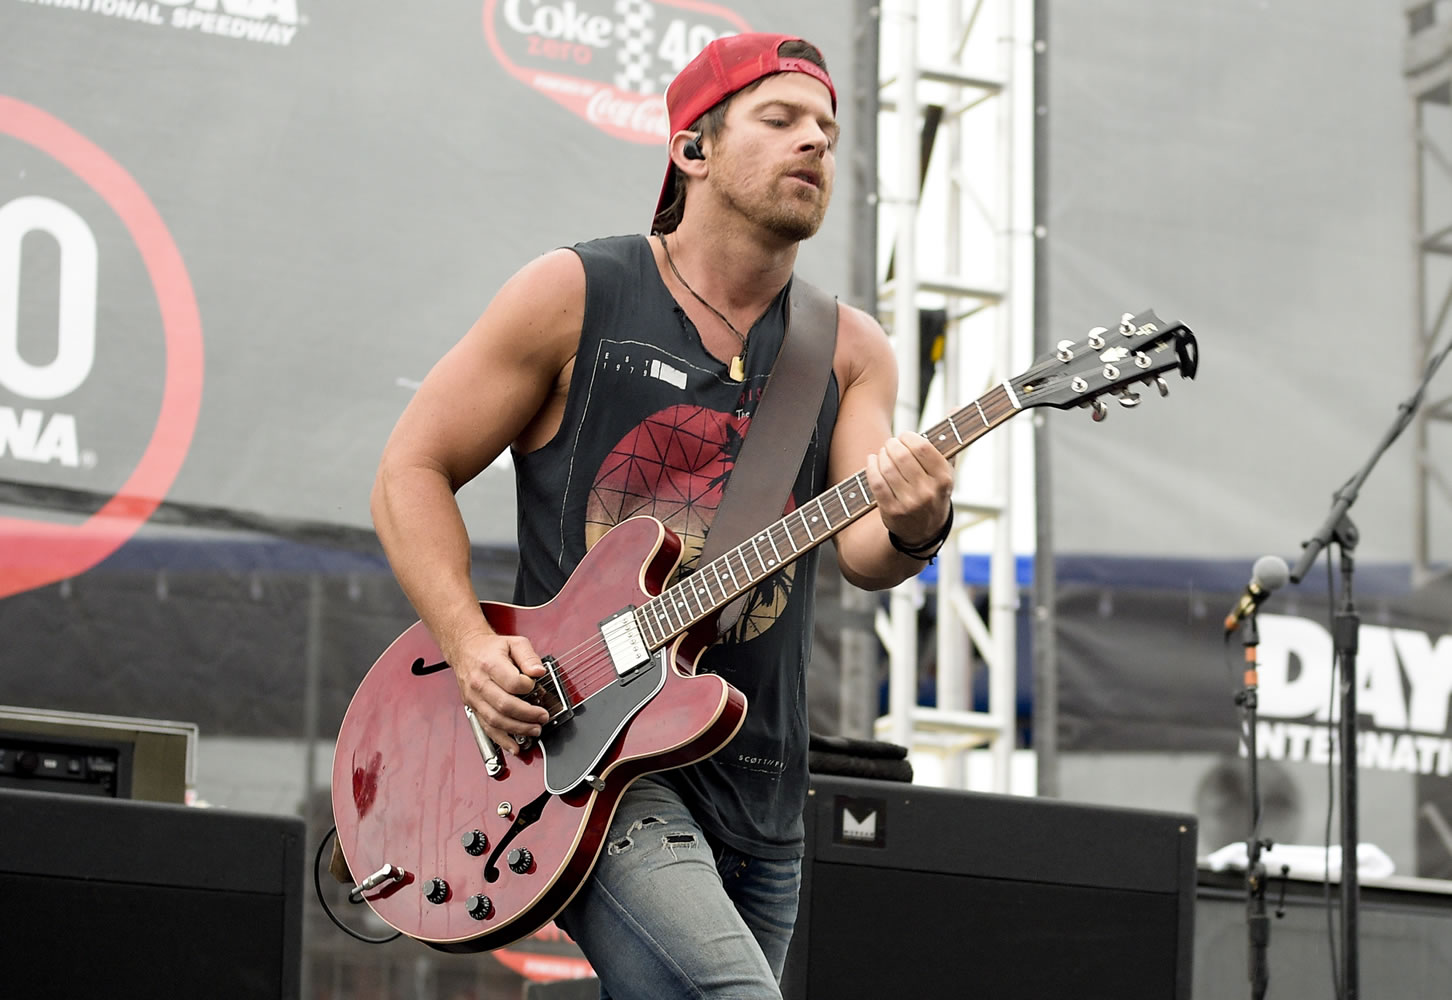 Musician Kip Moore performs July 5 before the start of the NASCAR Sprint Cup series auto race in Daytona Beach, Fla. Last month in Annapolis, Maryland, Moore opened the first of four skate parks that he is helping to fund with the Comeback Kid Skatepark Project, an initiative of his donor-advised charitable fund, Kip's Kids Fund. Another park opened in San Marcos, Texas, and two more will be opened in Nashville, Tennessee and Boston.